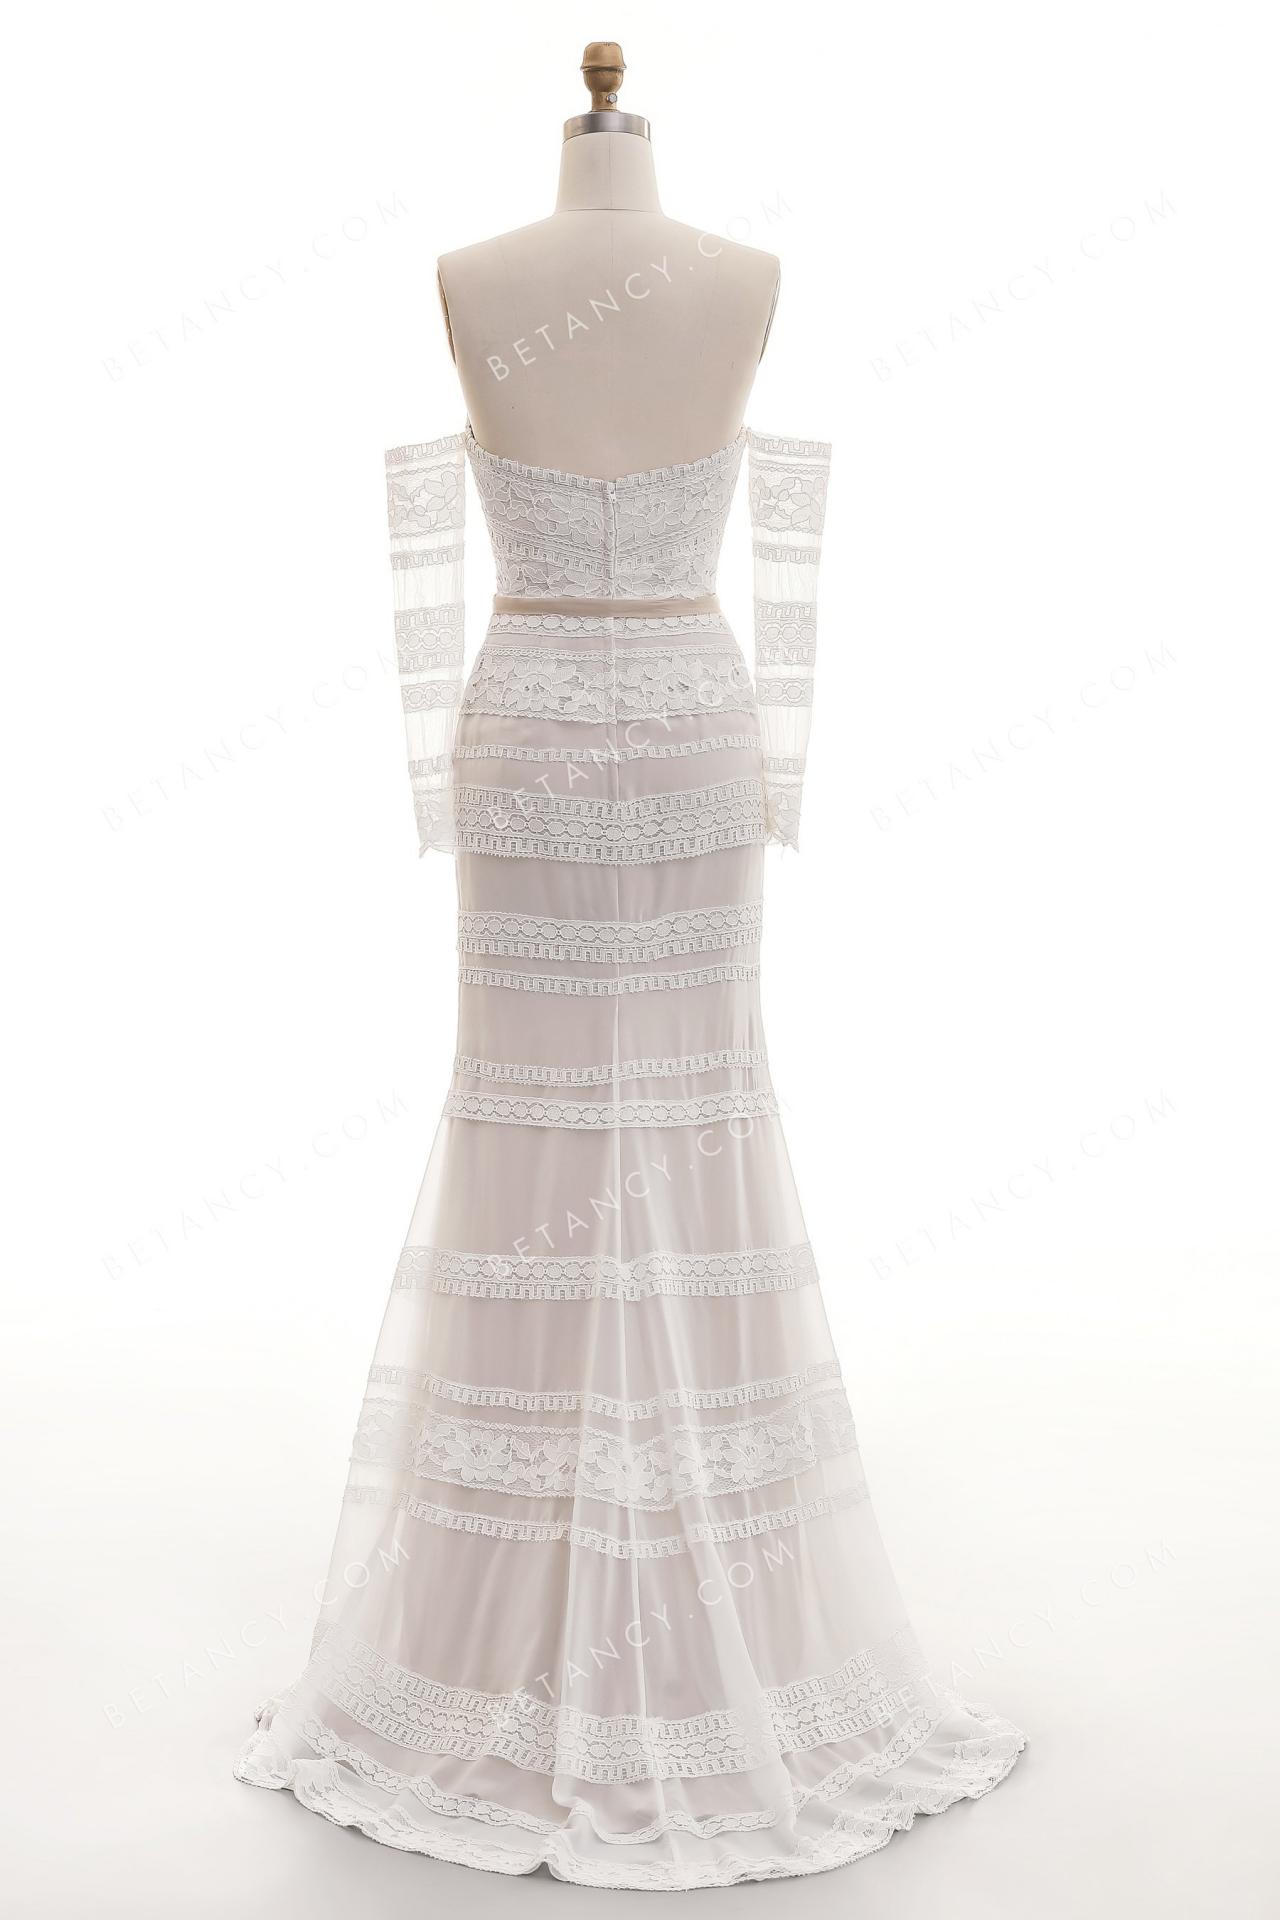 Straight across neckline with separated lace sleeve wedding dress 5